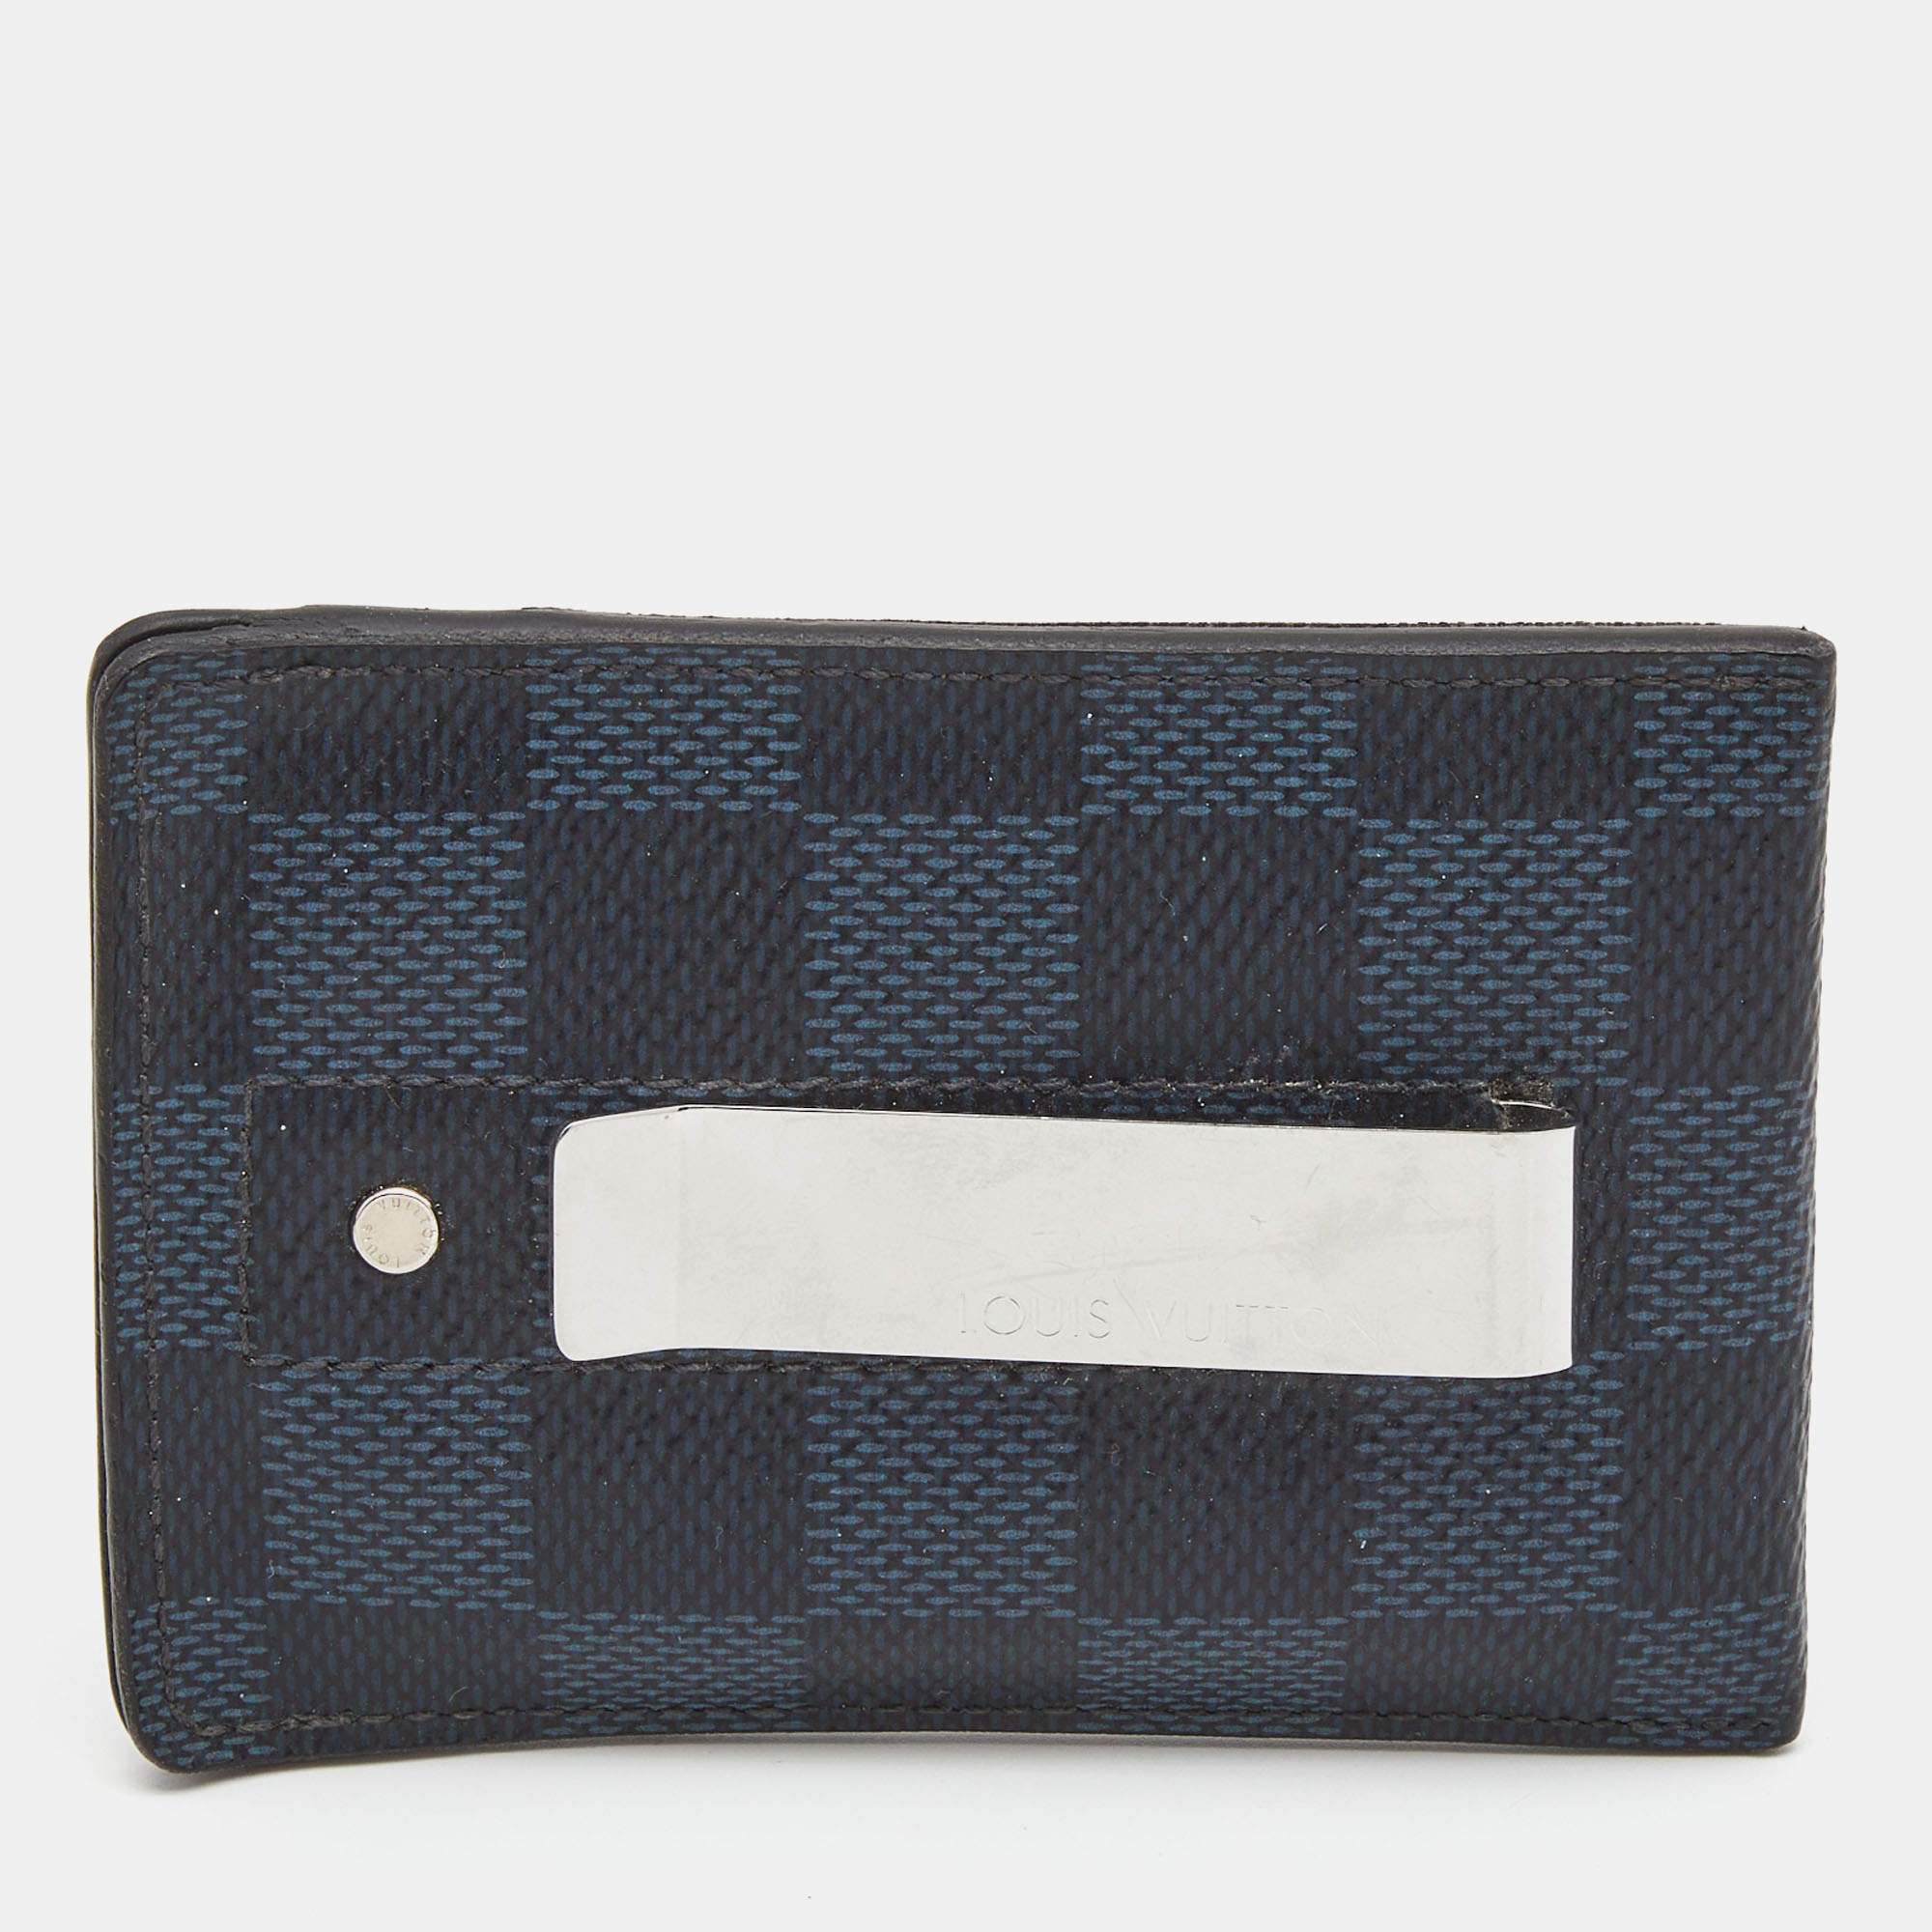 Shop Louis Vuitton DAMIER GRAPHITE Pince card holder with bill clip  (N60246) by SkyNS